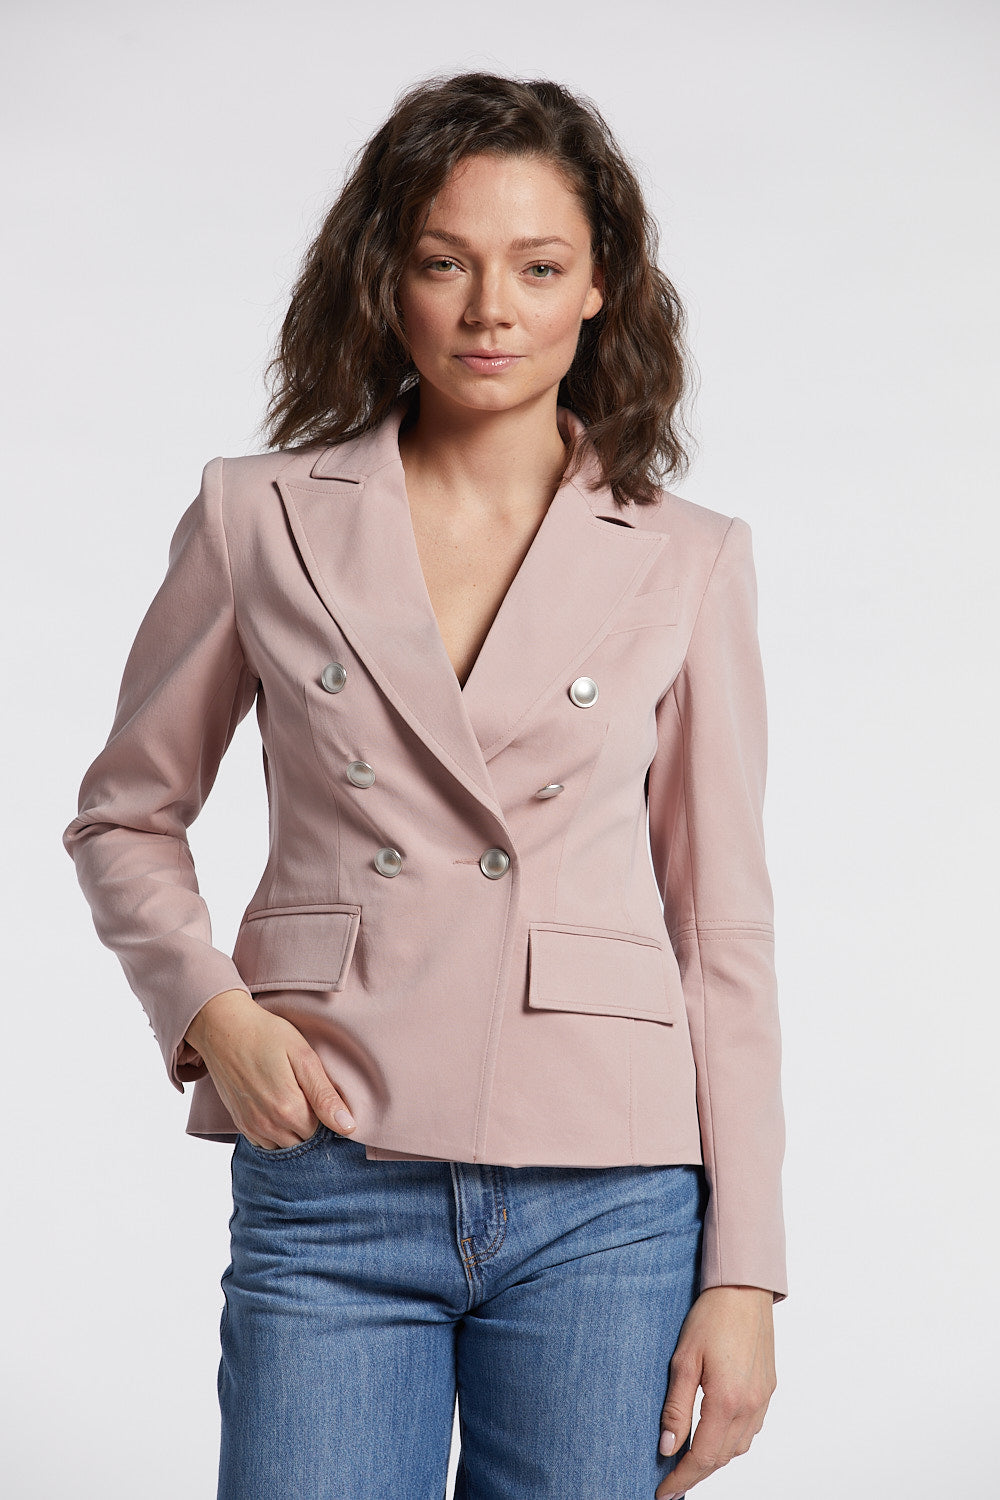 Adroit Atelier James Double Breasted Signature Stretch Blazer in Blush